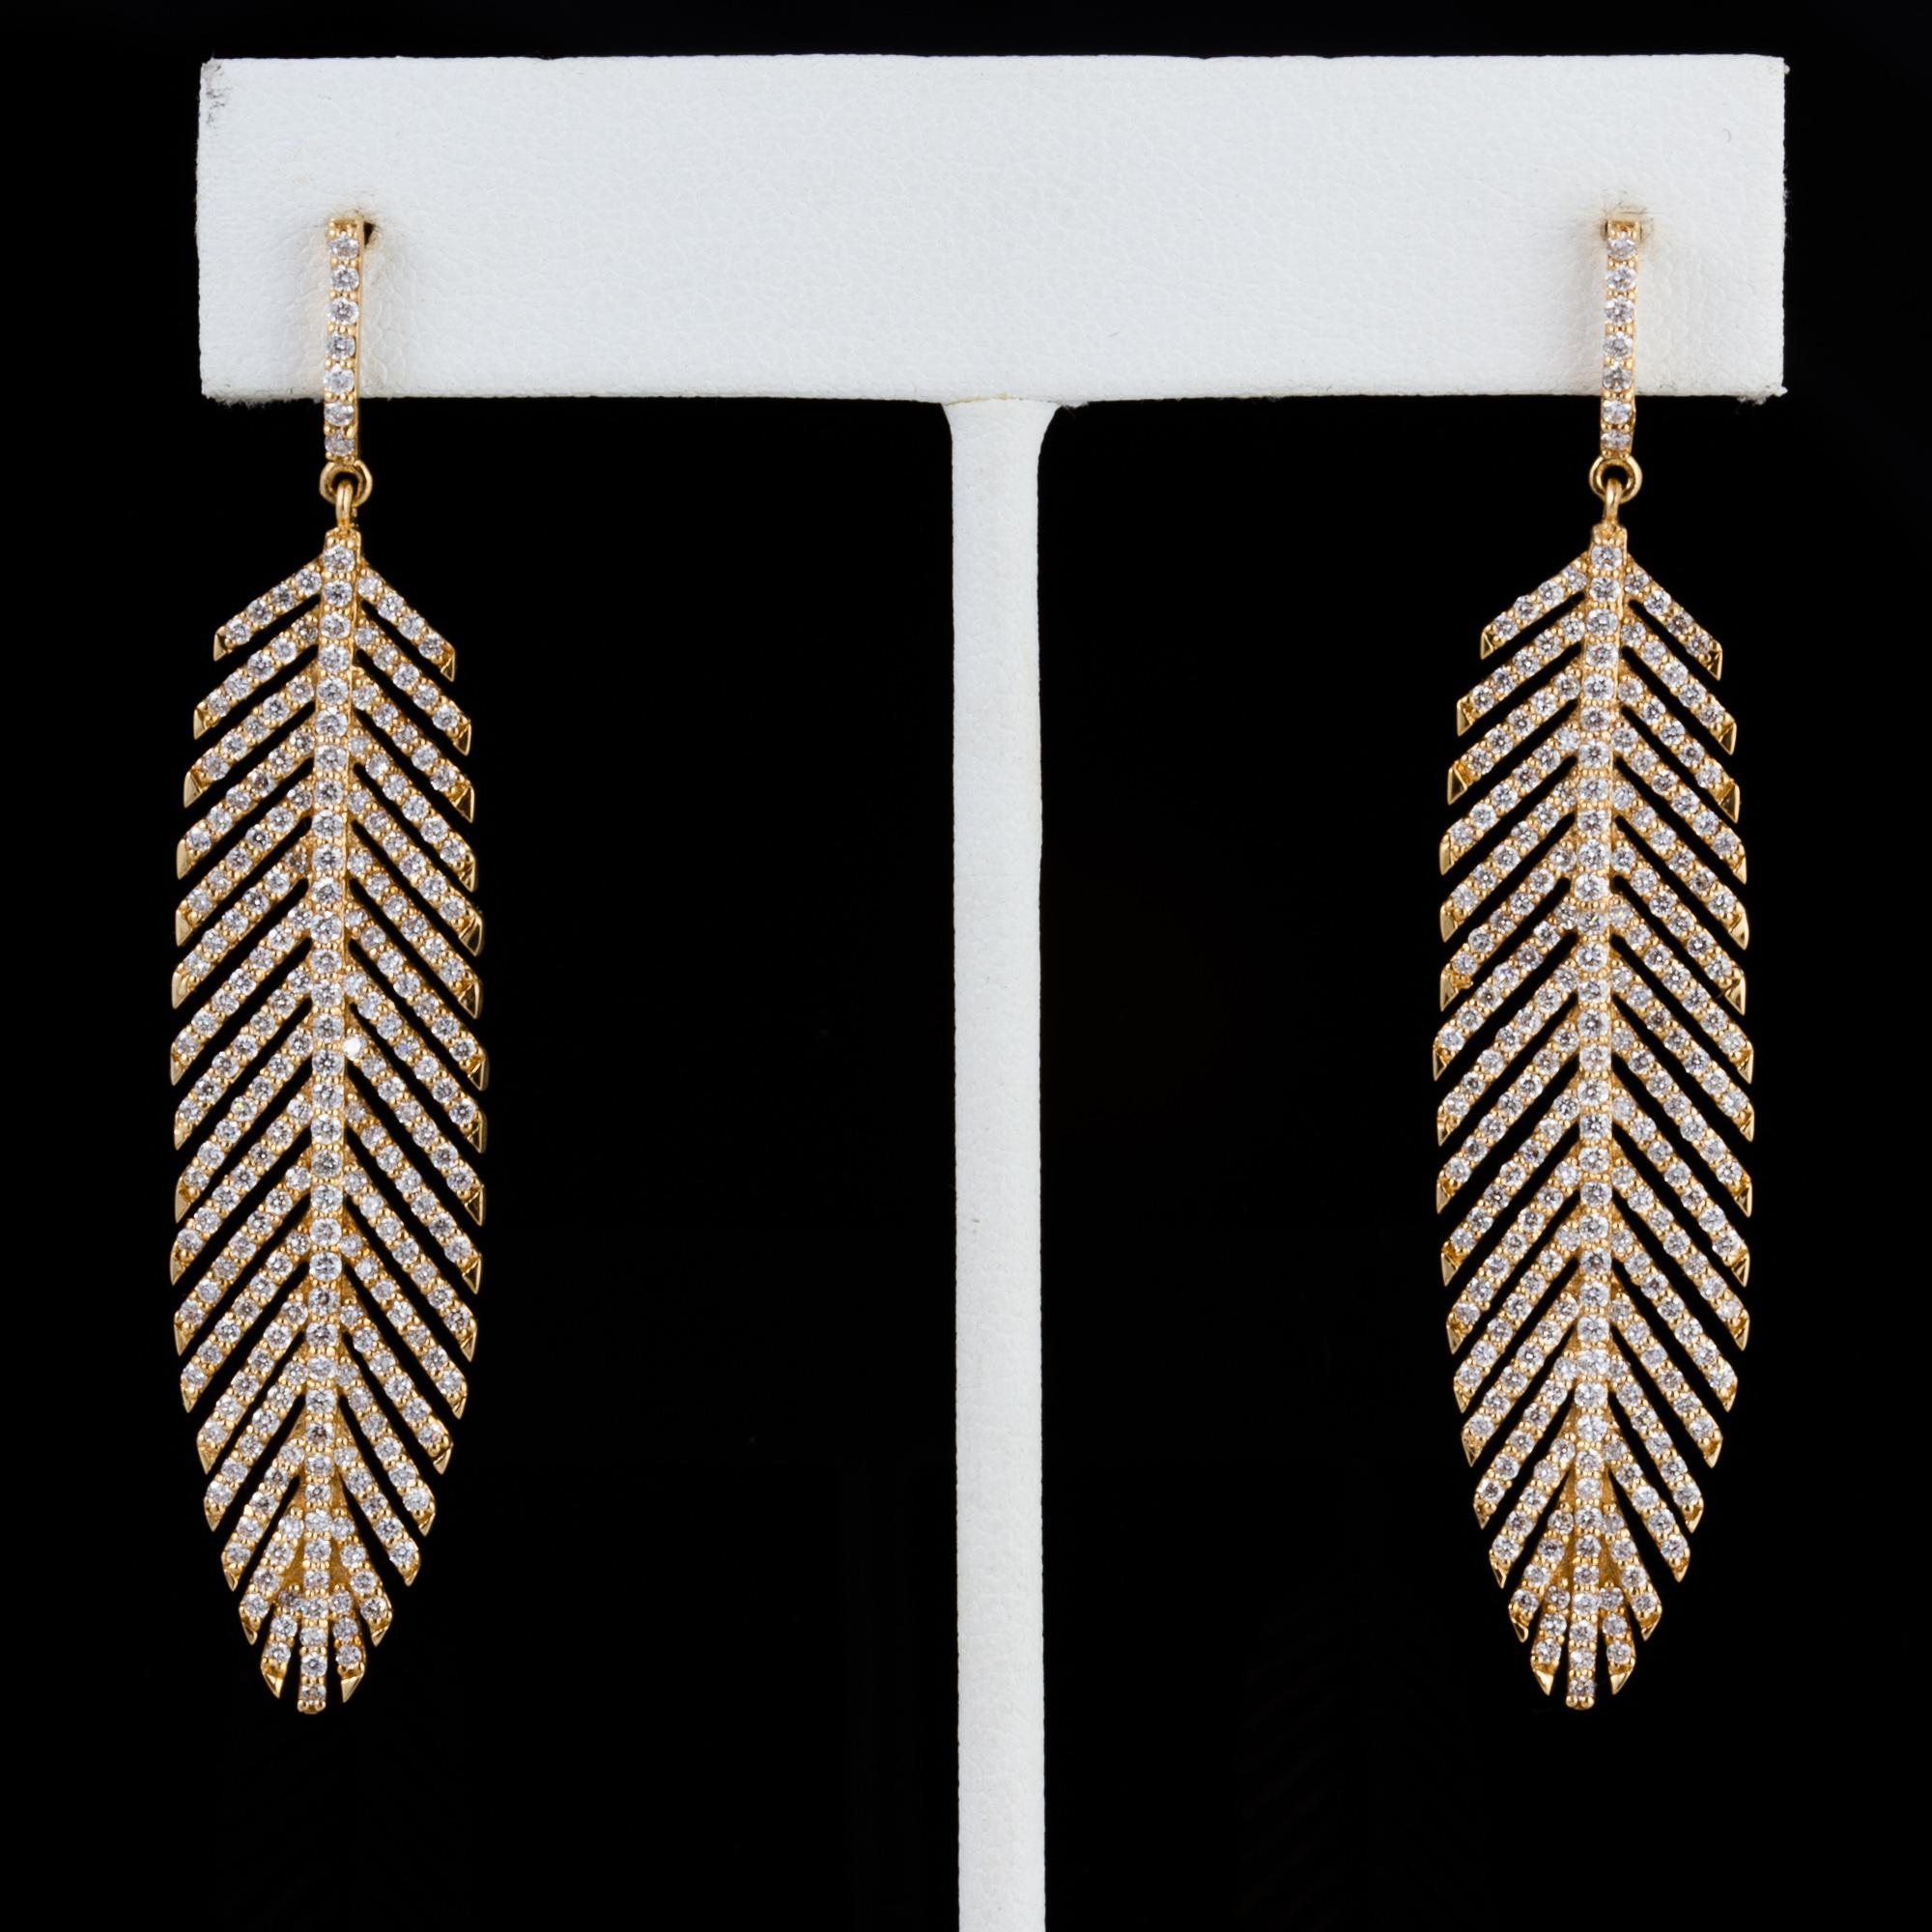 Created using 500 hand set stones, these amazing dangle earrings are produced in the United States by a master European certified goldsmith.  

Created by noted jewelry designer David Meelheim Designs, David creates unique pieces incorporating rare,